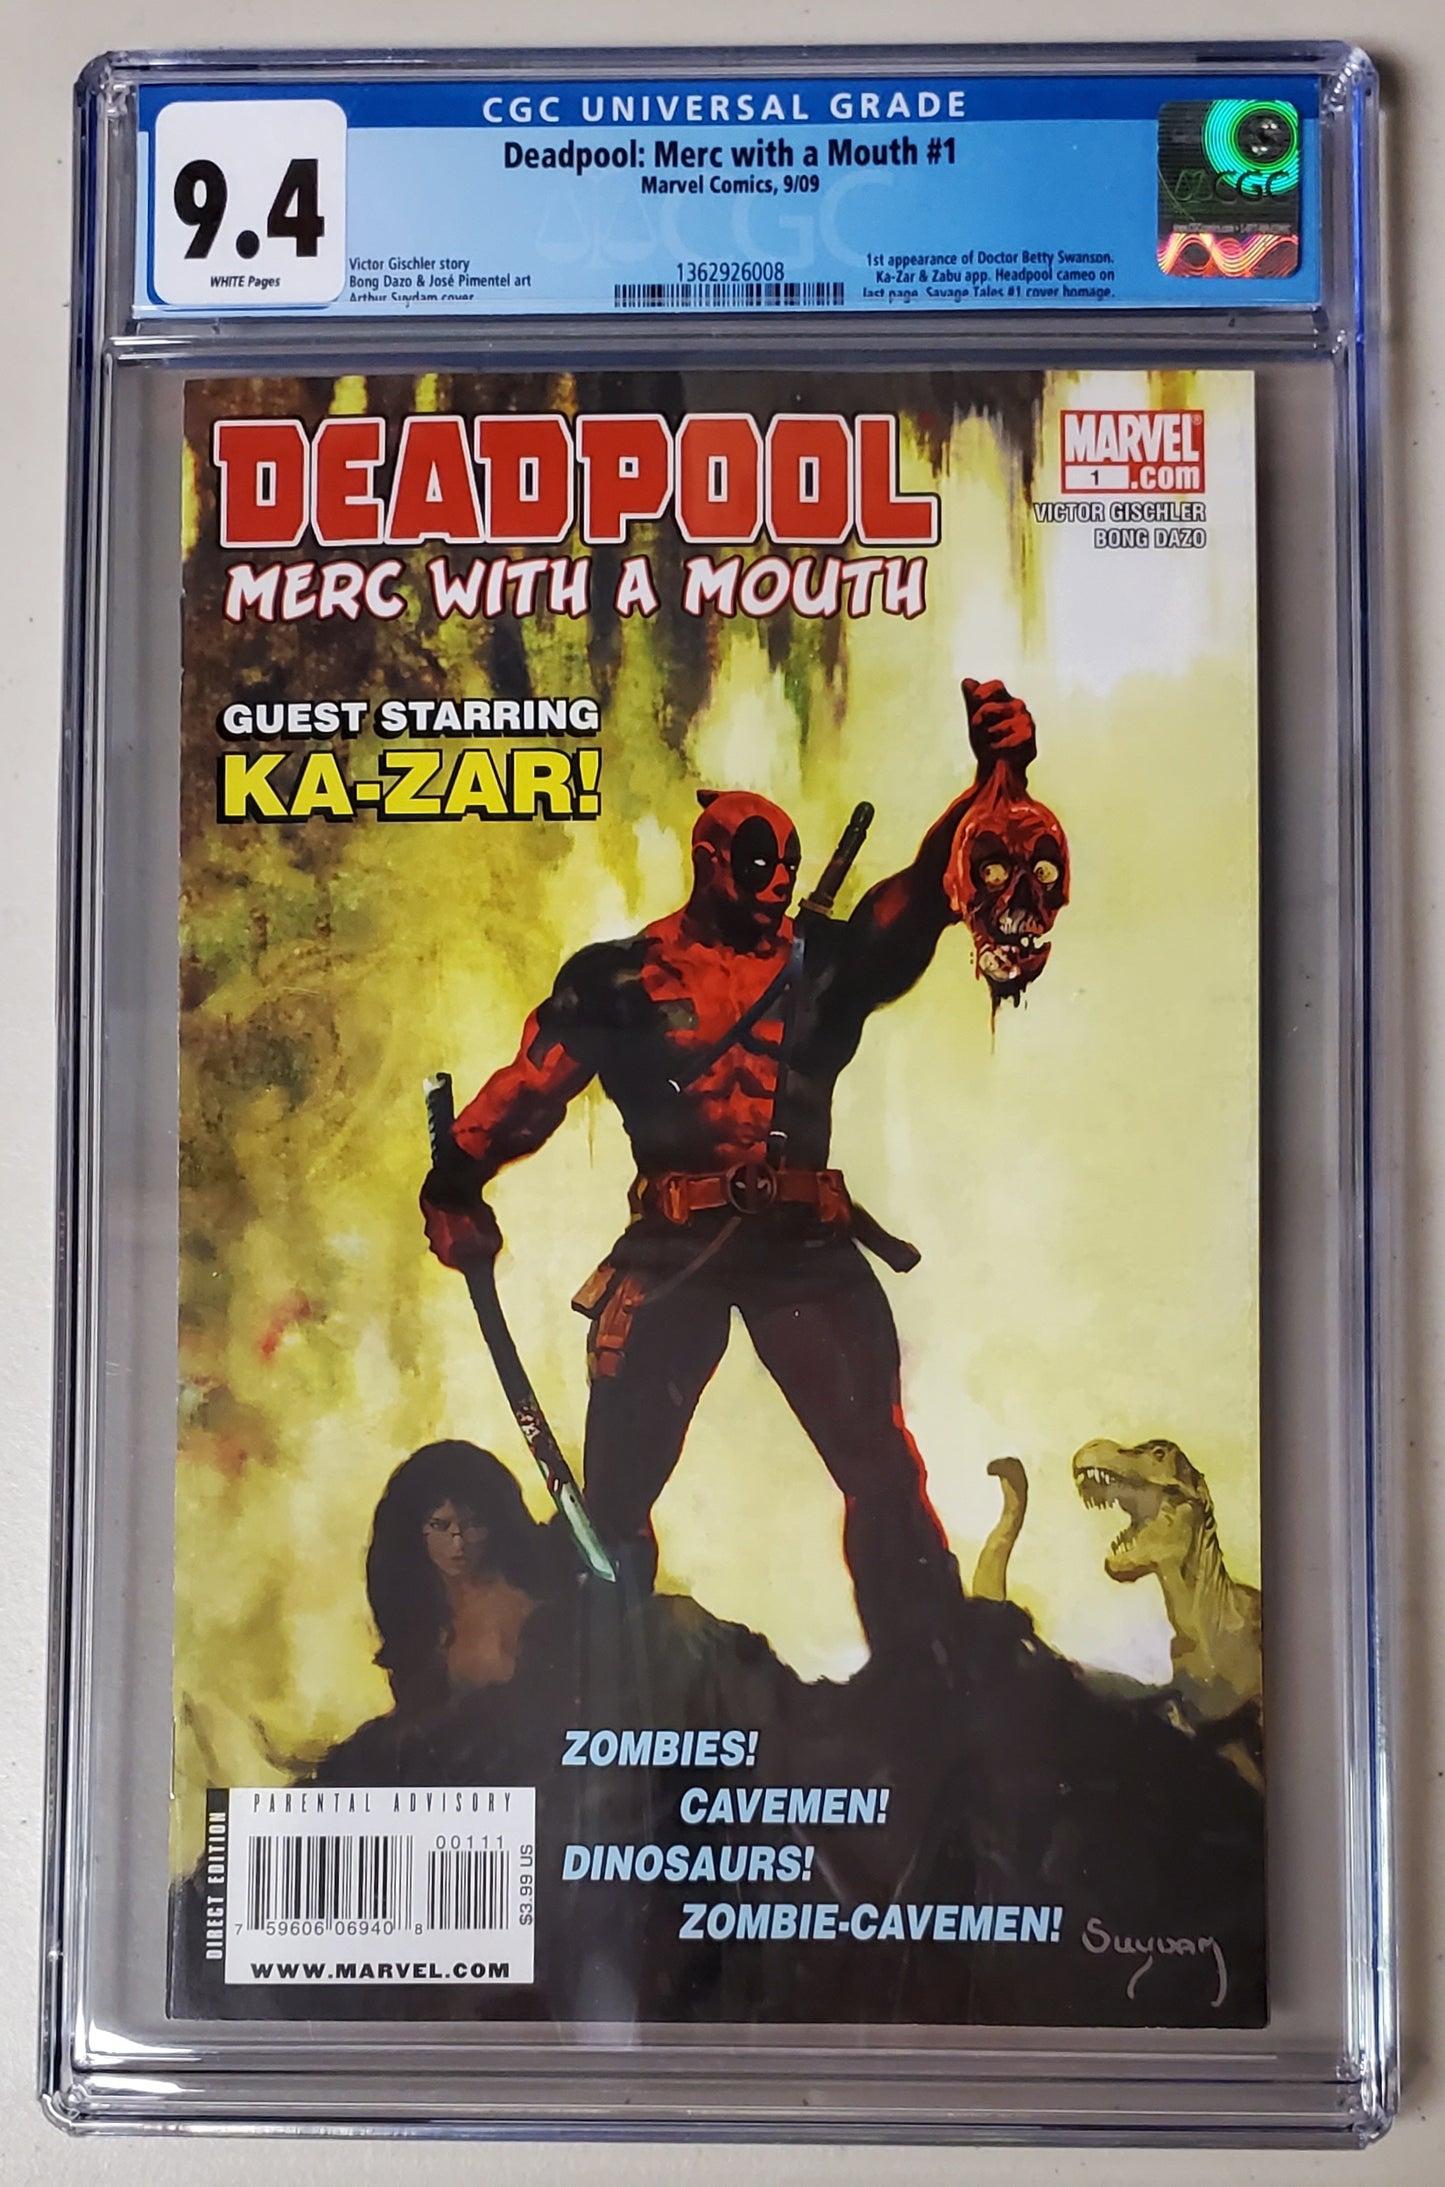 9.4 CGC Deadpool Merc with a Mouth #1 (1st Dr. Betty Swanson) 2009 [1362926008]